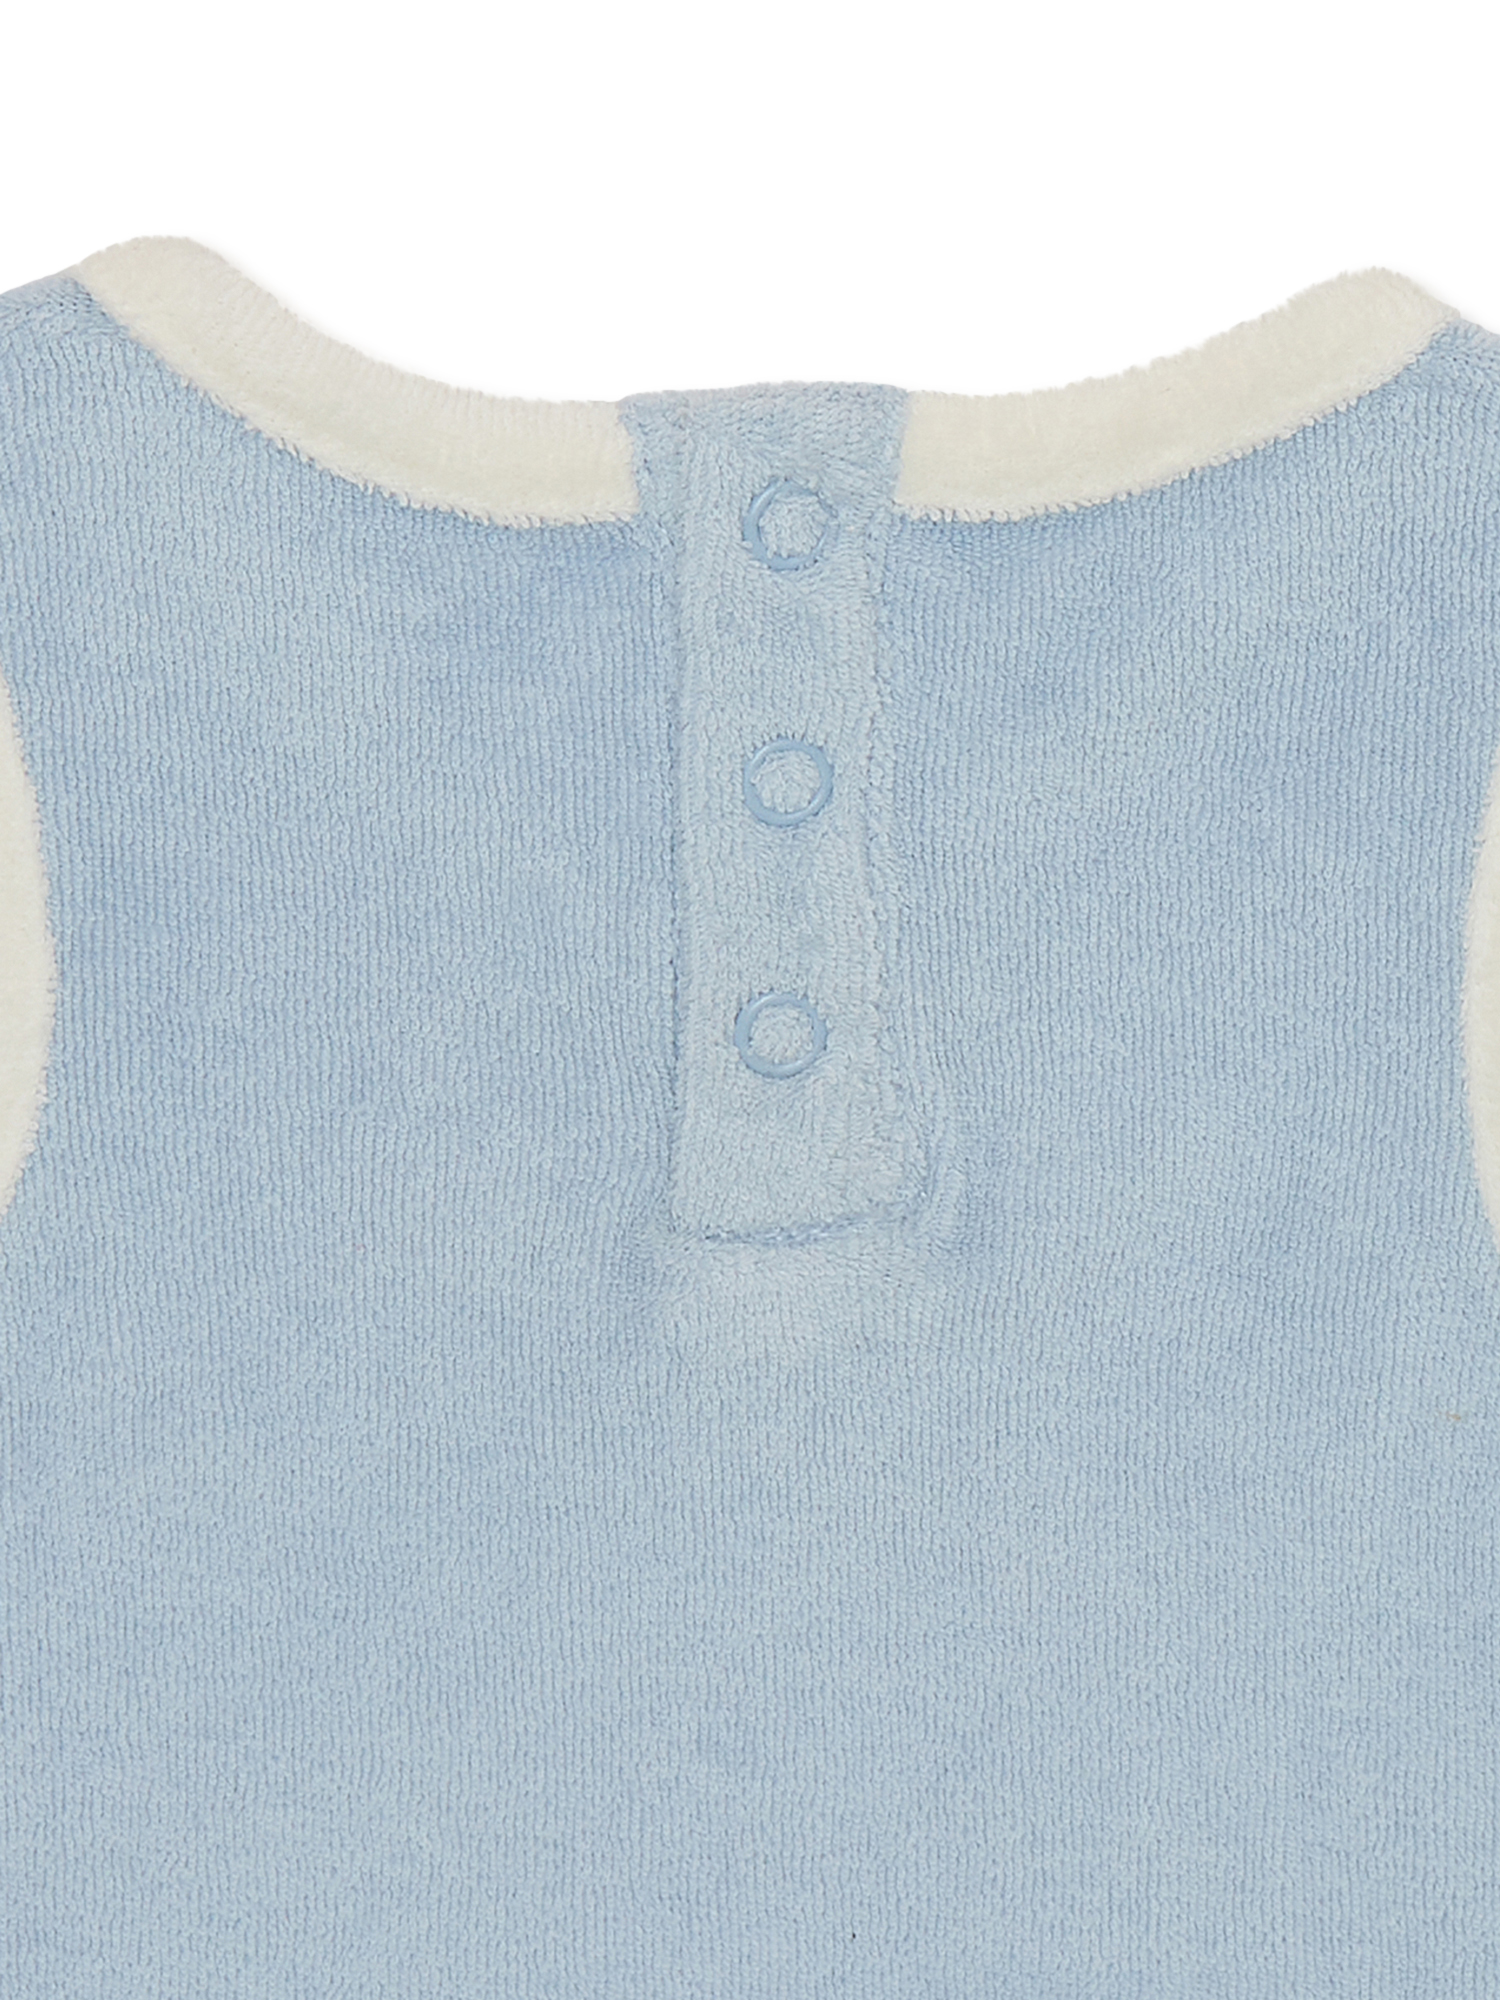 easy-peasy Baby Solid Tank Top, Sizes 0-24 Months - image 2 of 4